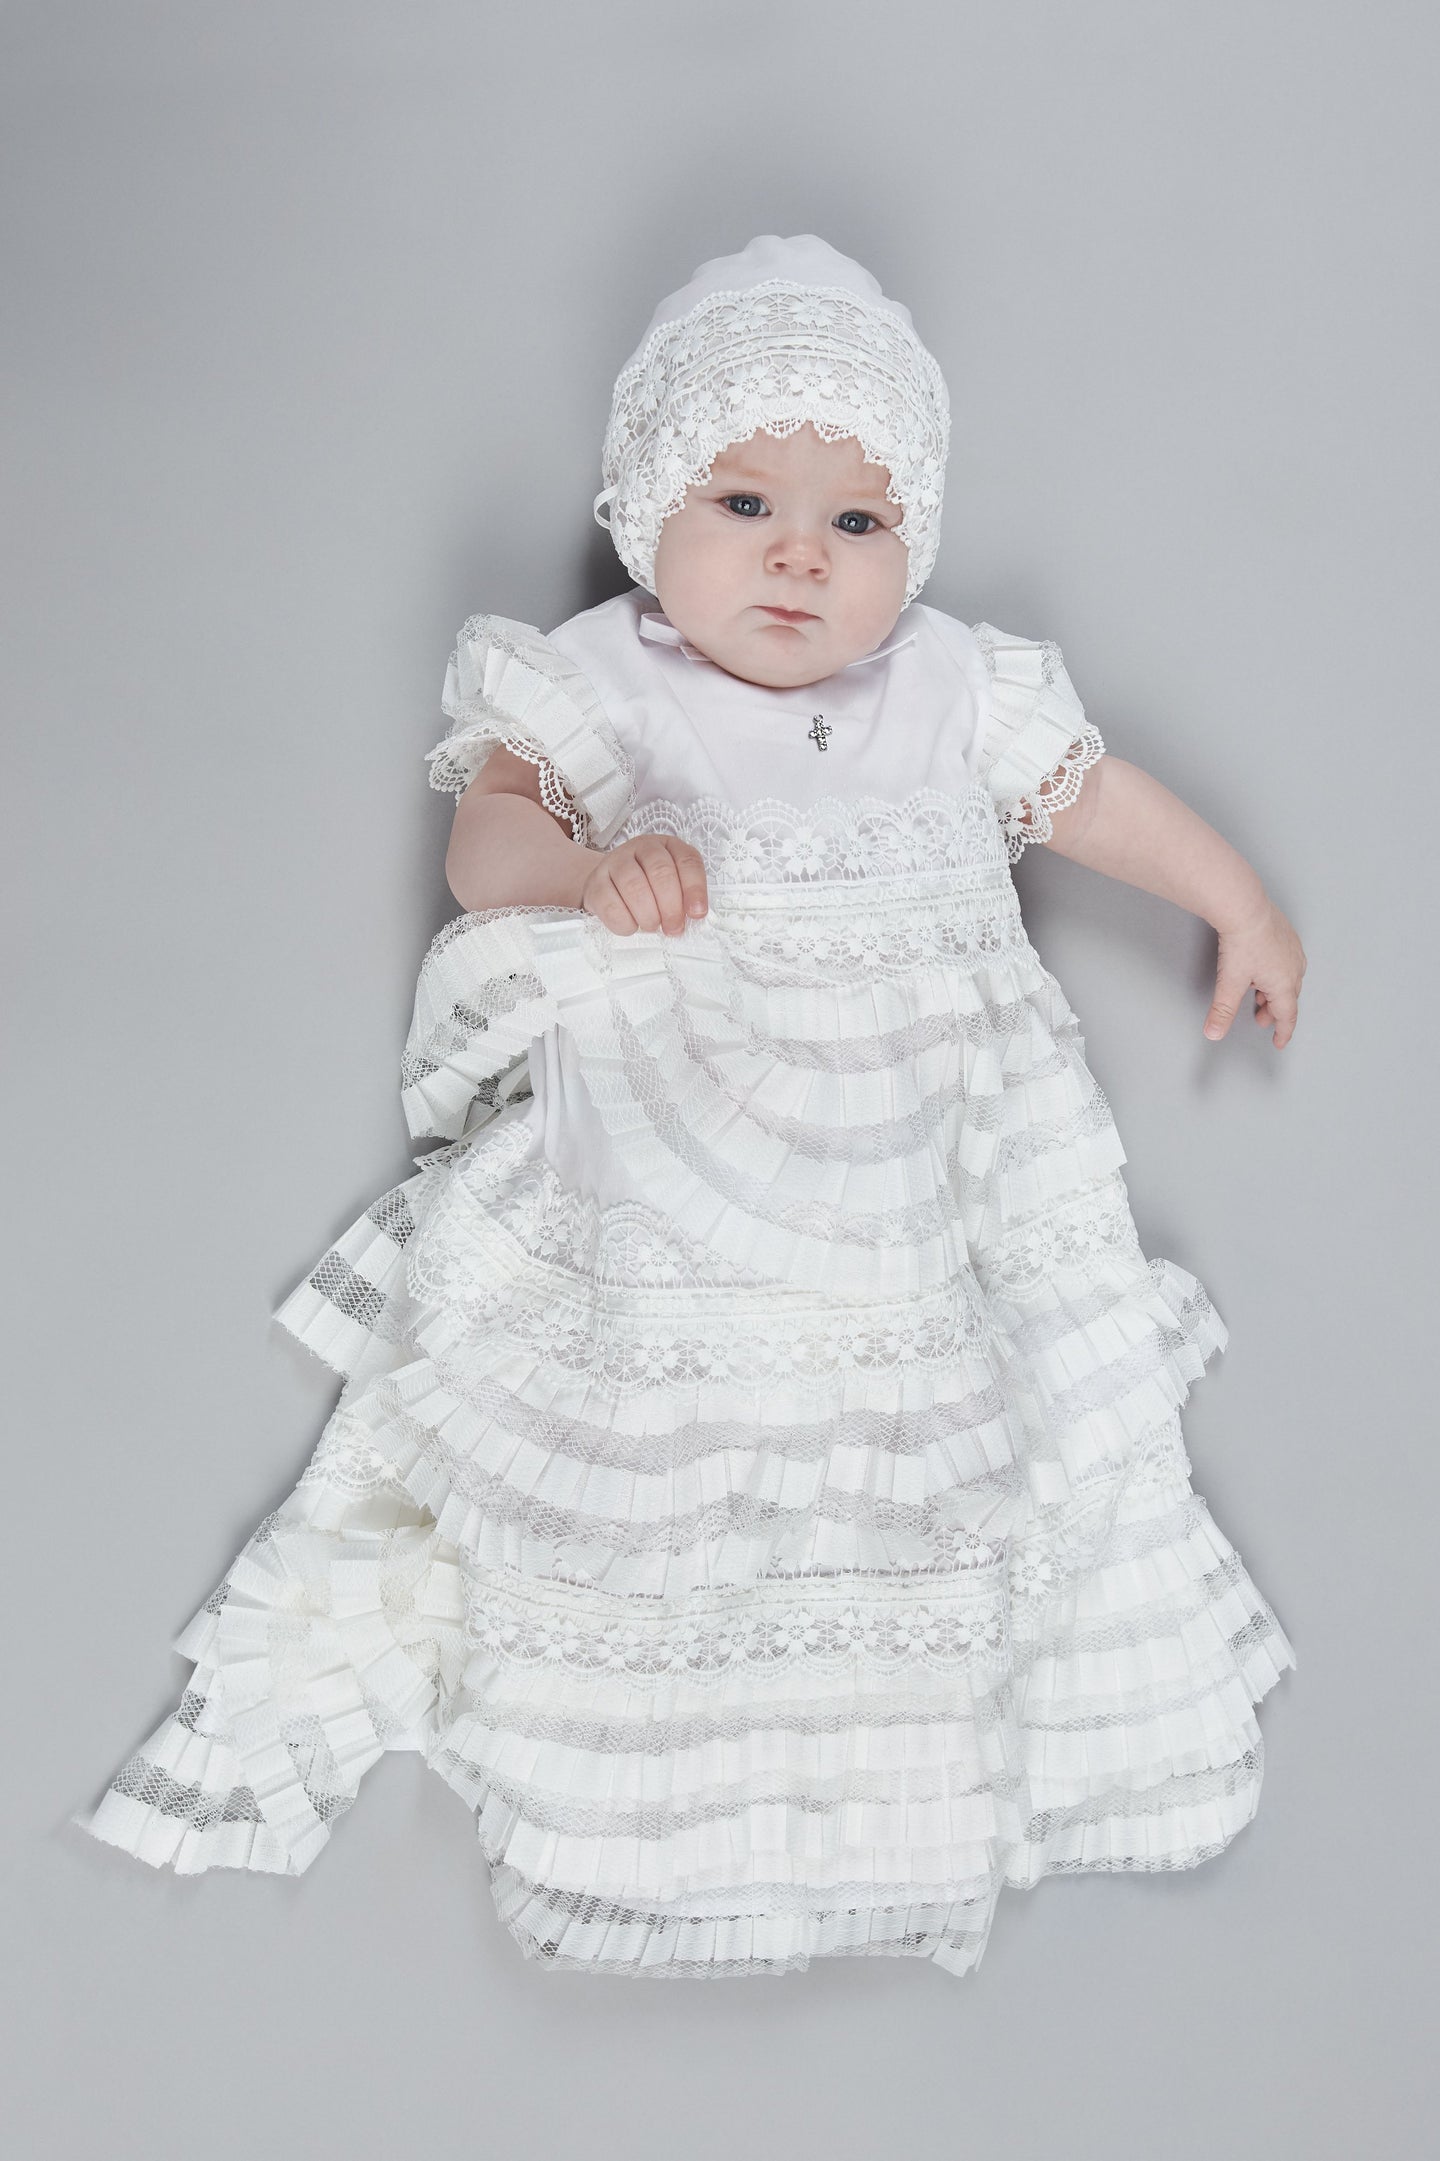 All Over Ruffles Christening/Baptismal Gown and Bonnet Set